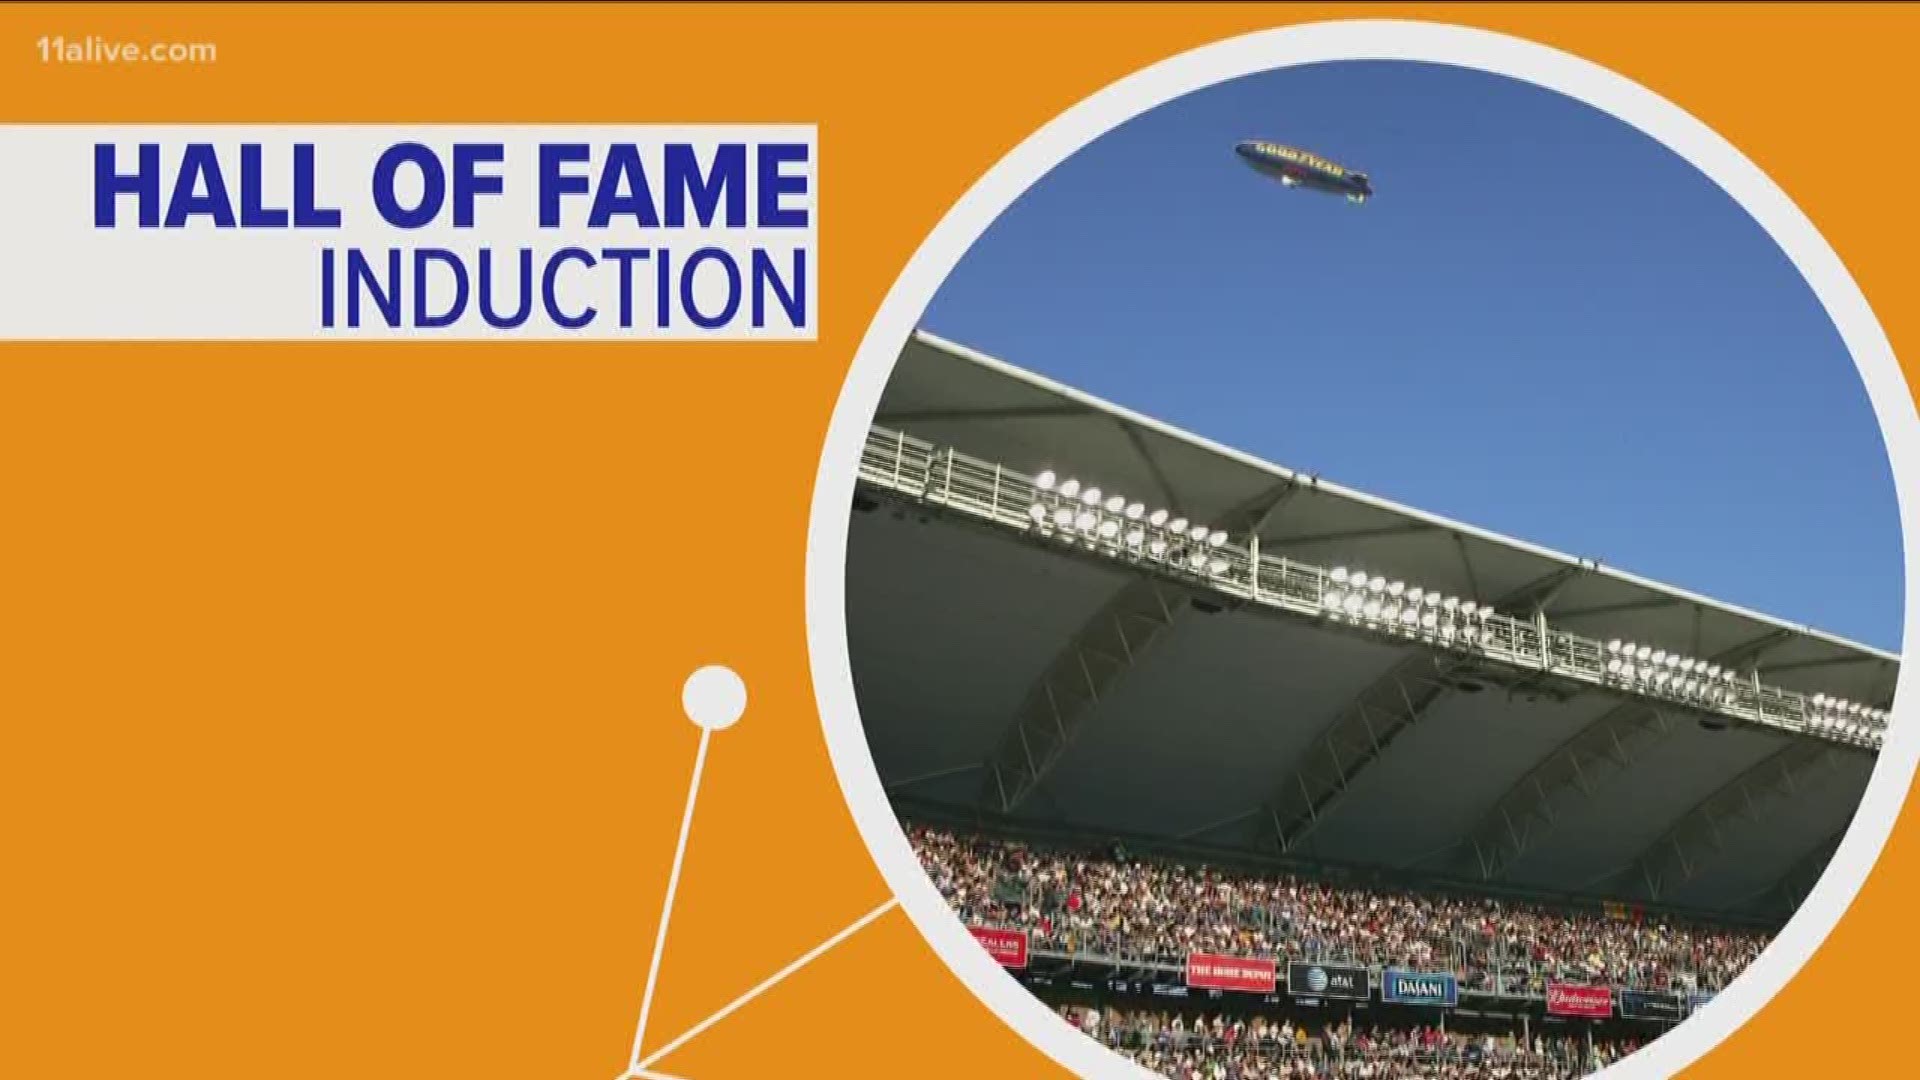 The Good Year Blimp will be inducted into the College Football Hall of Fame.